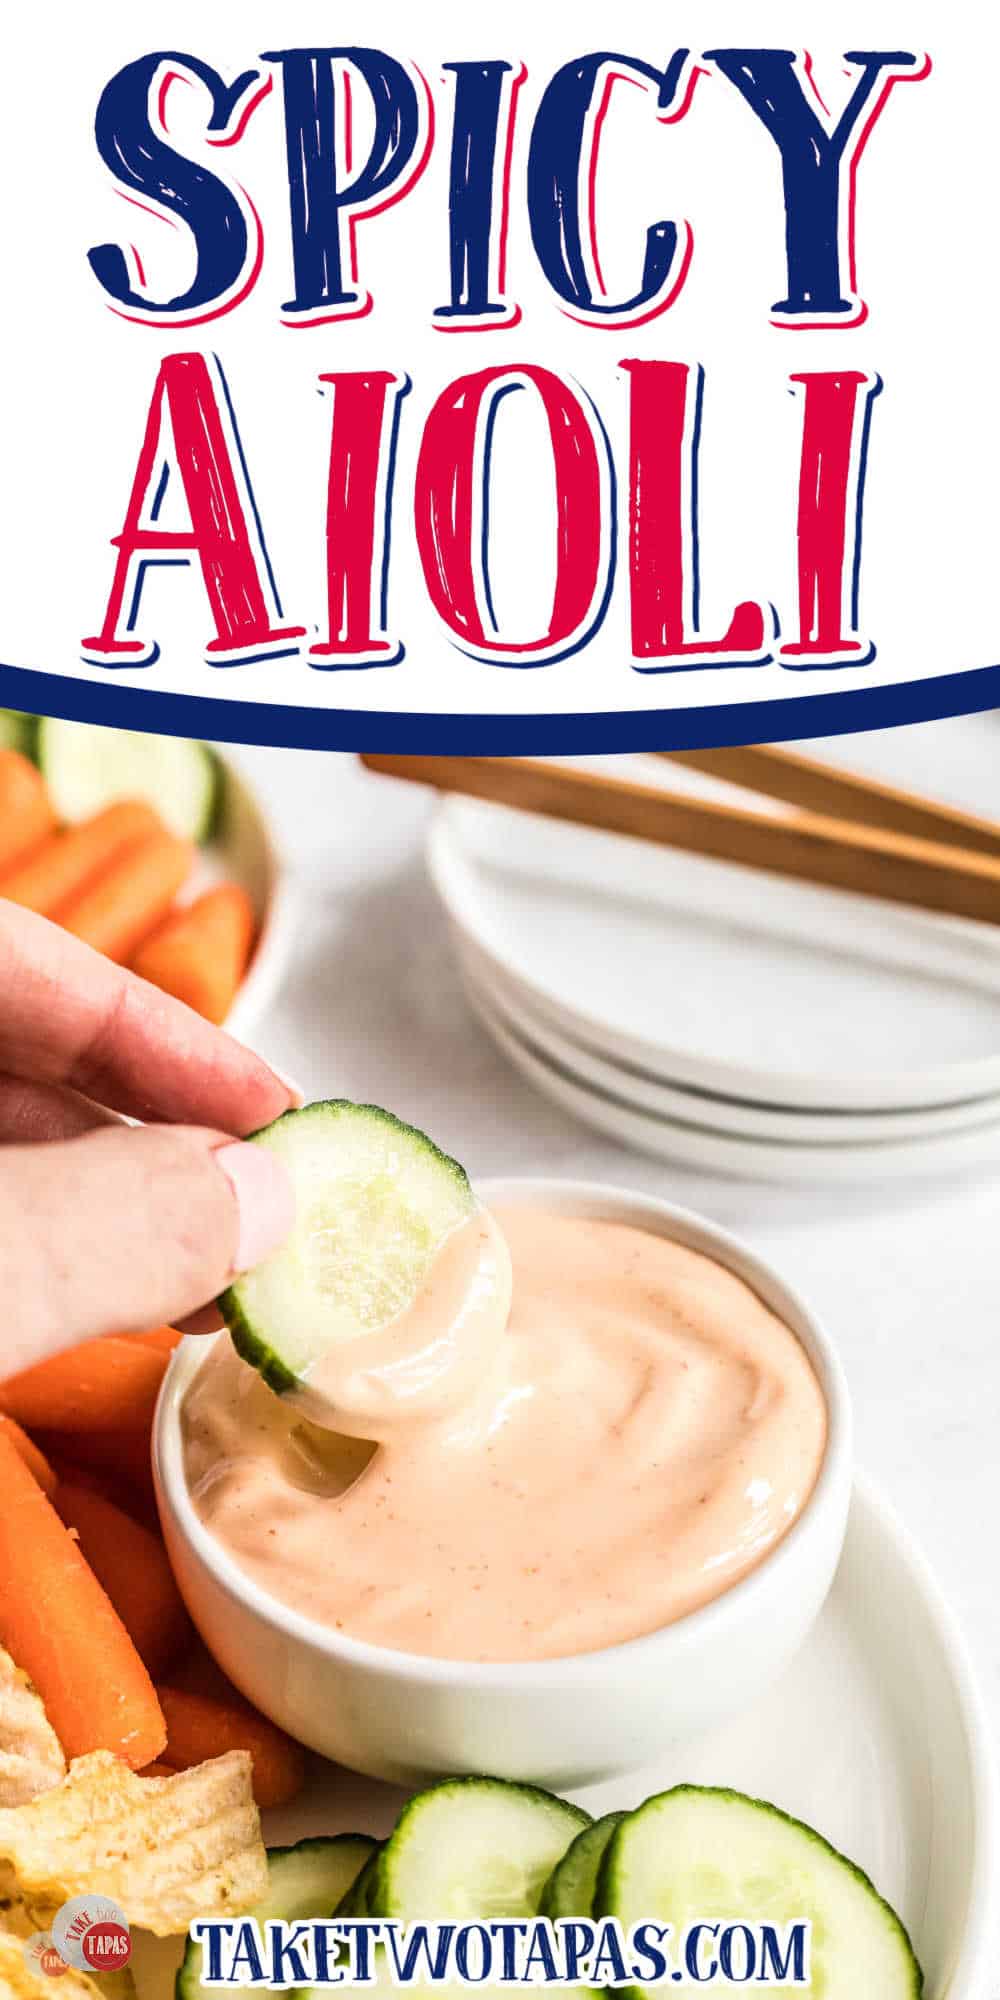 Spicy aioli sauce in small bowl on a white plate with fresh baby carrots and slices of cucumber next to it, and there is a hand dipping a slice of cucumber into the sauce and lifting it out mid-air. There is text on the top part of the image that reads "Spicy Aioli".